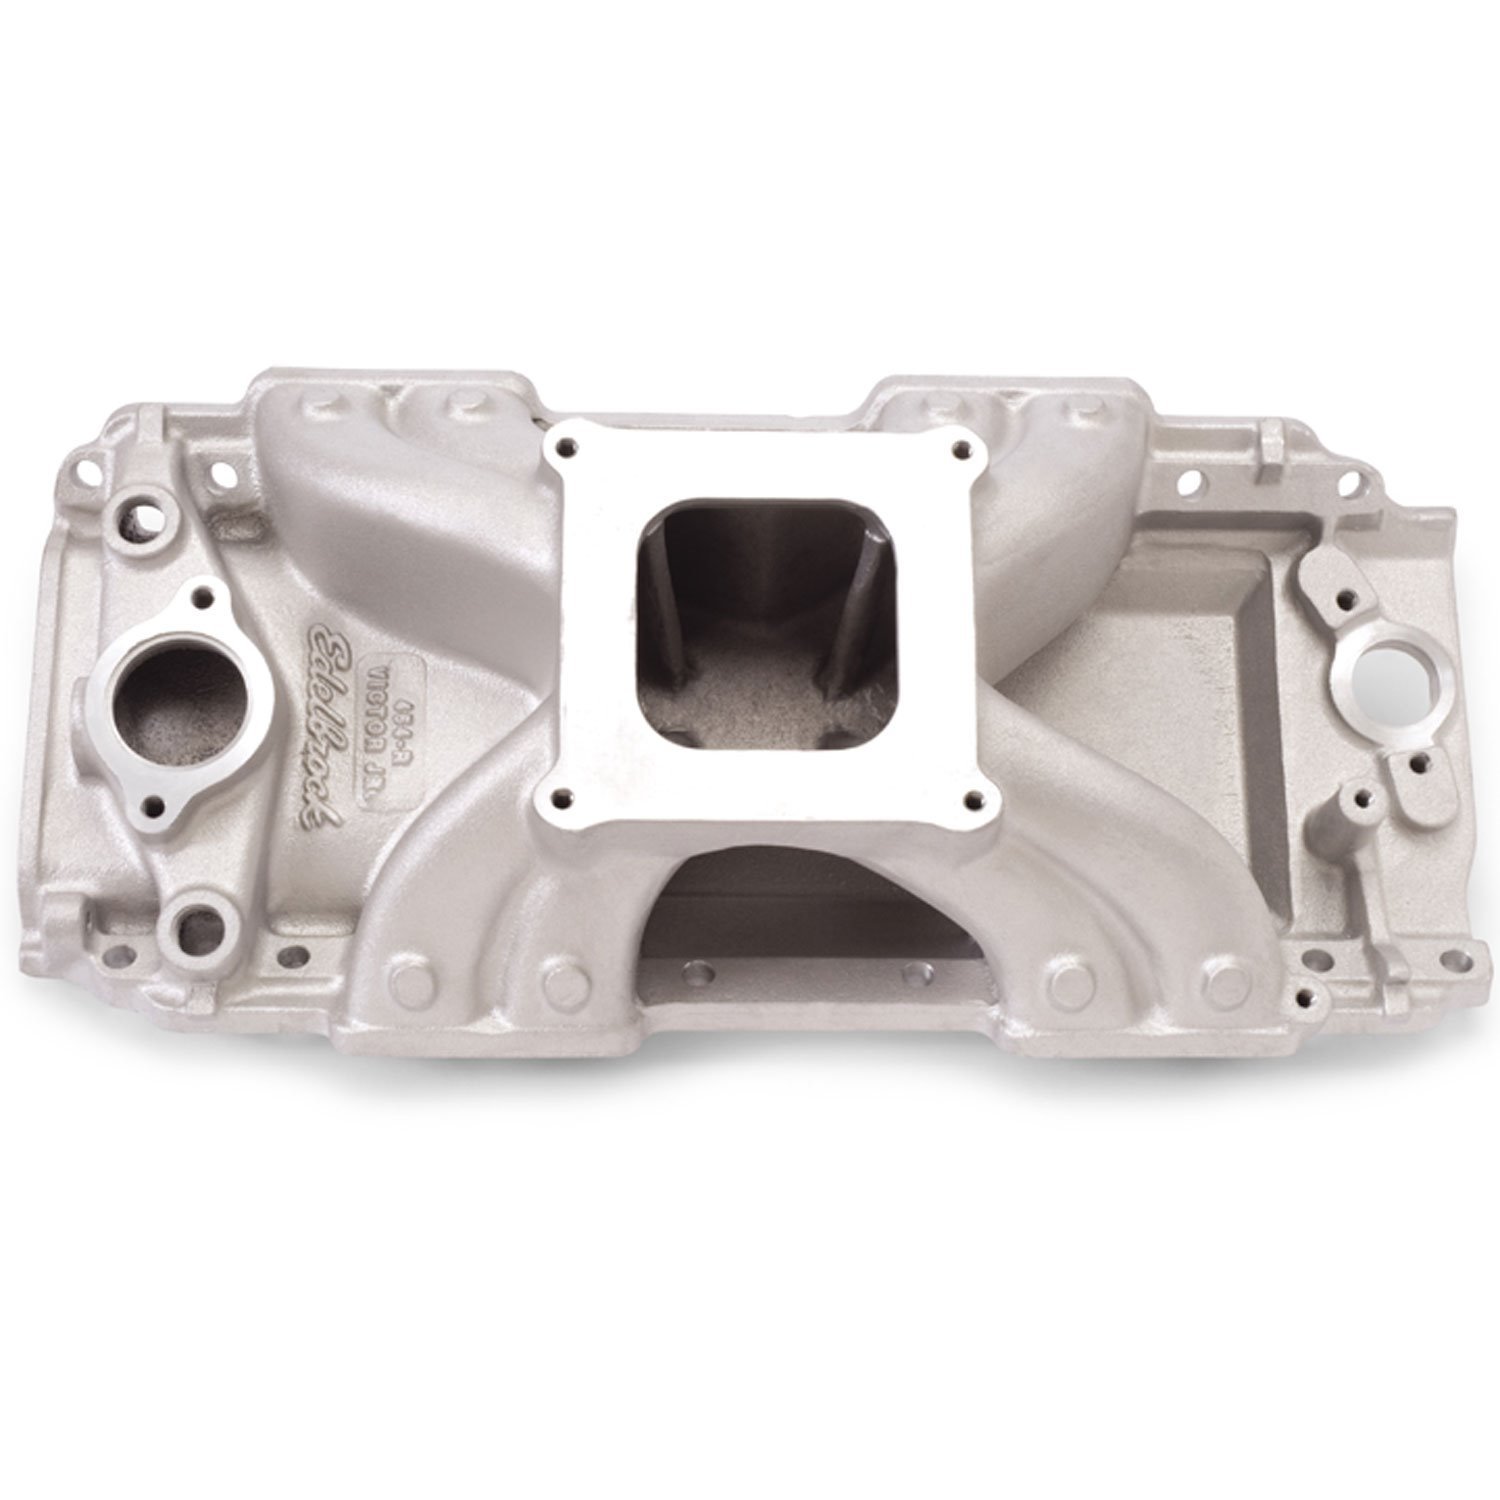 2902 Victor Jr. 454-R Intake Manifold for Big Block Chevy 396-502ci with Rectangular Port Heads